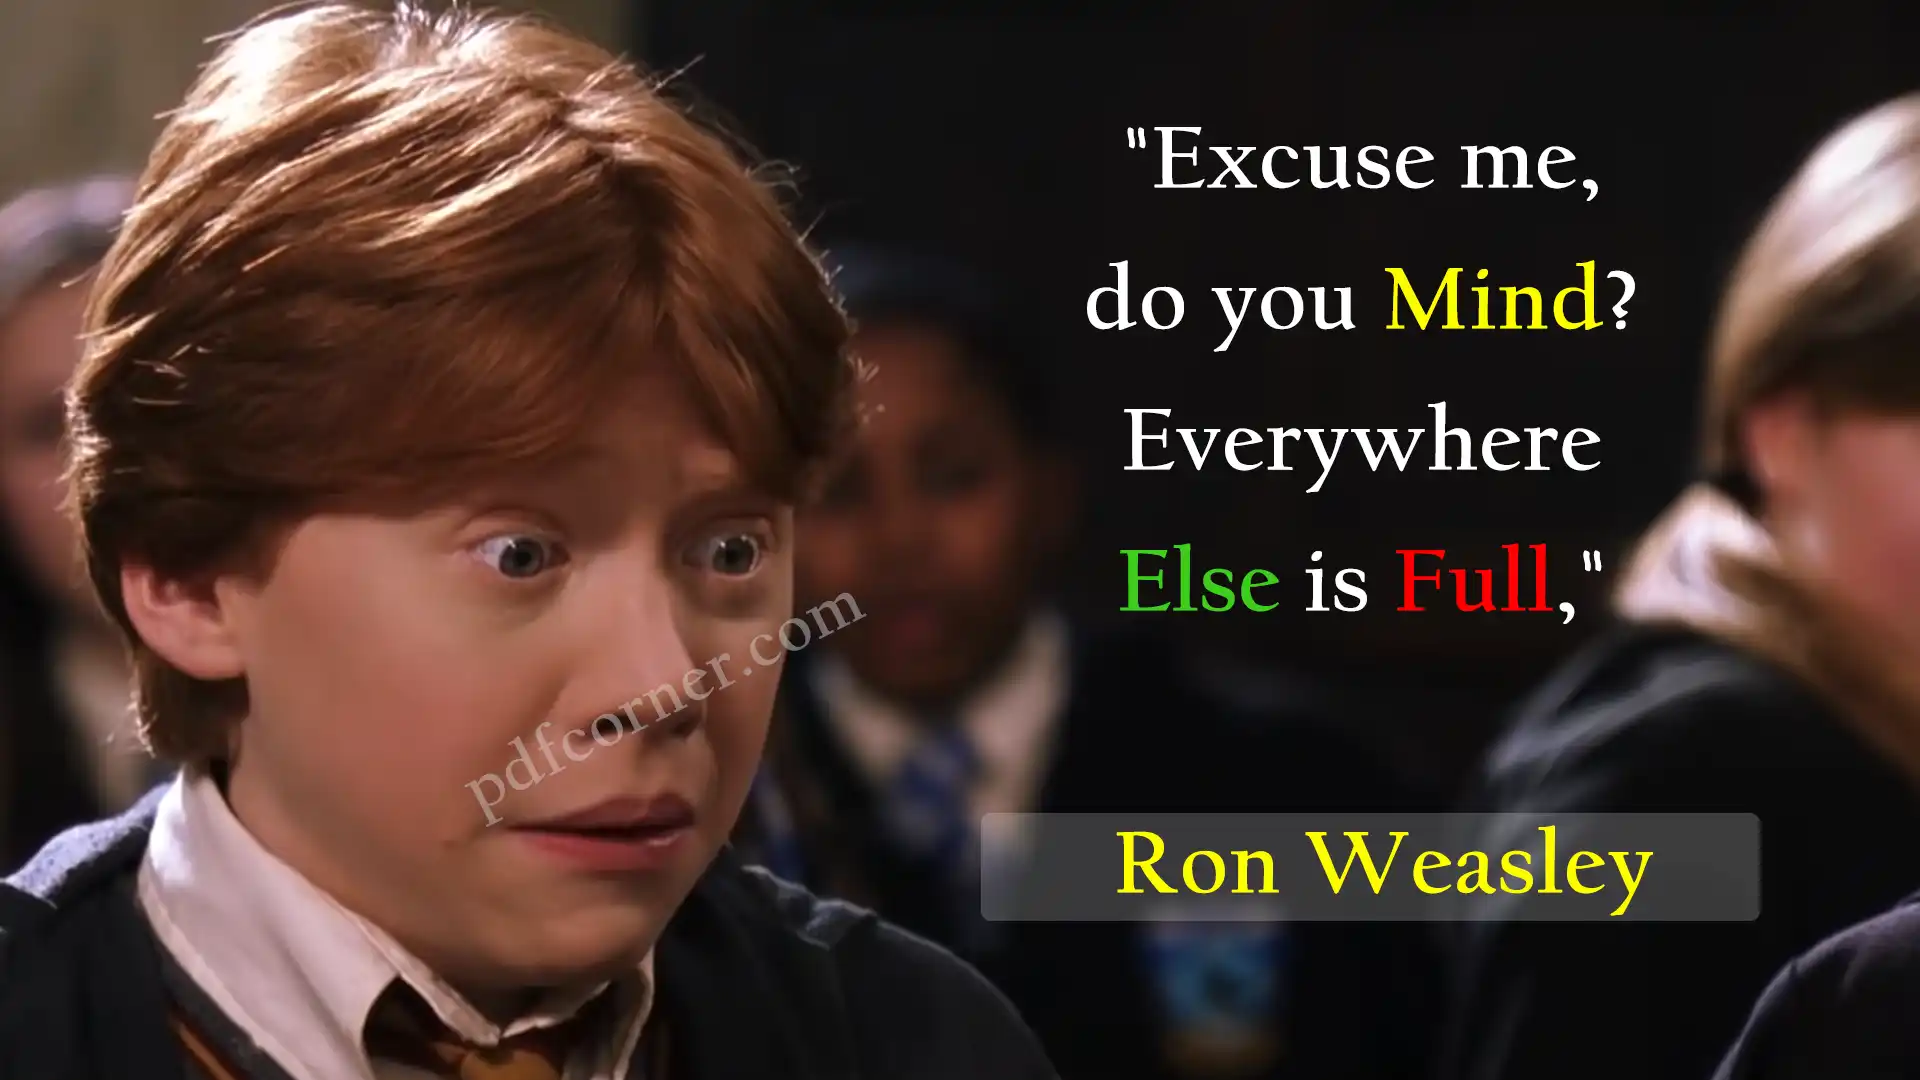 ron weasley in harry potter and the Deathly Hallows pdf